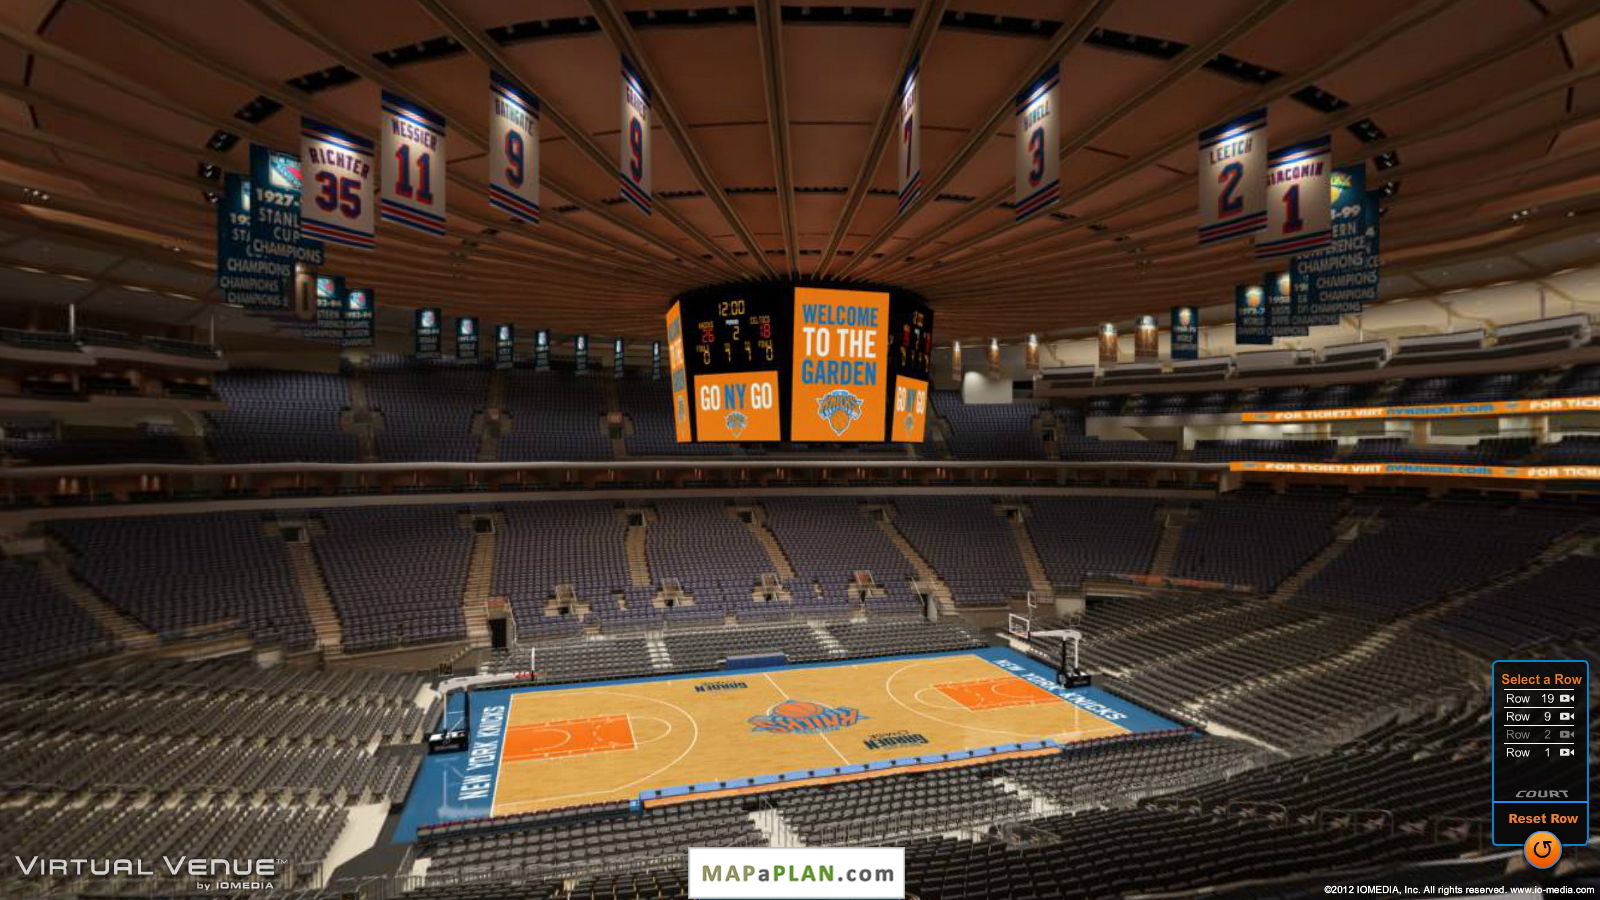 Madison Square Garden seating chart View from section 210